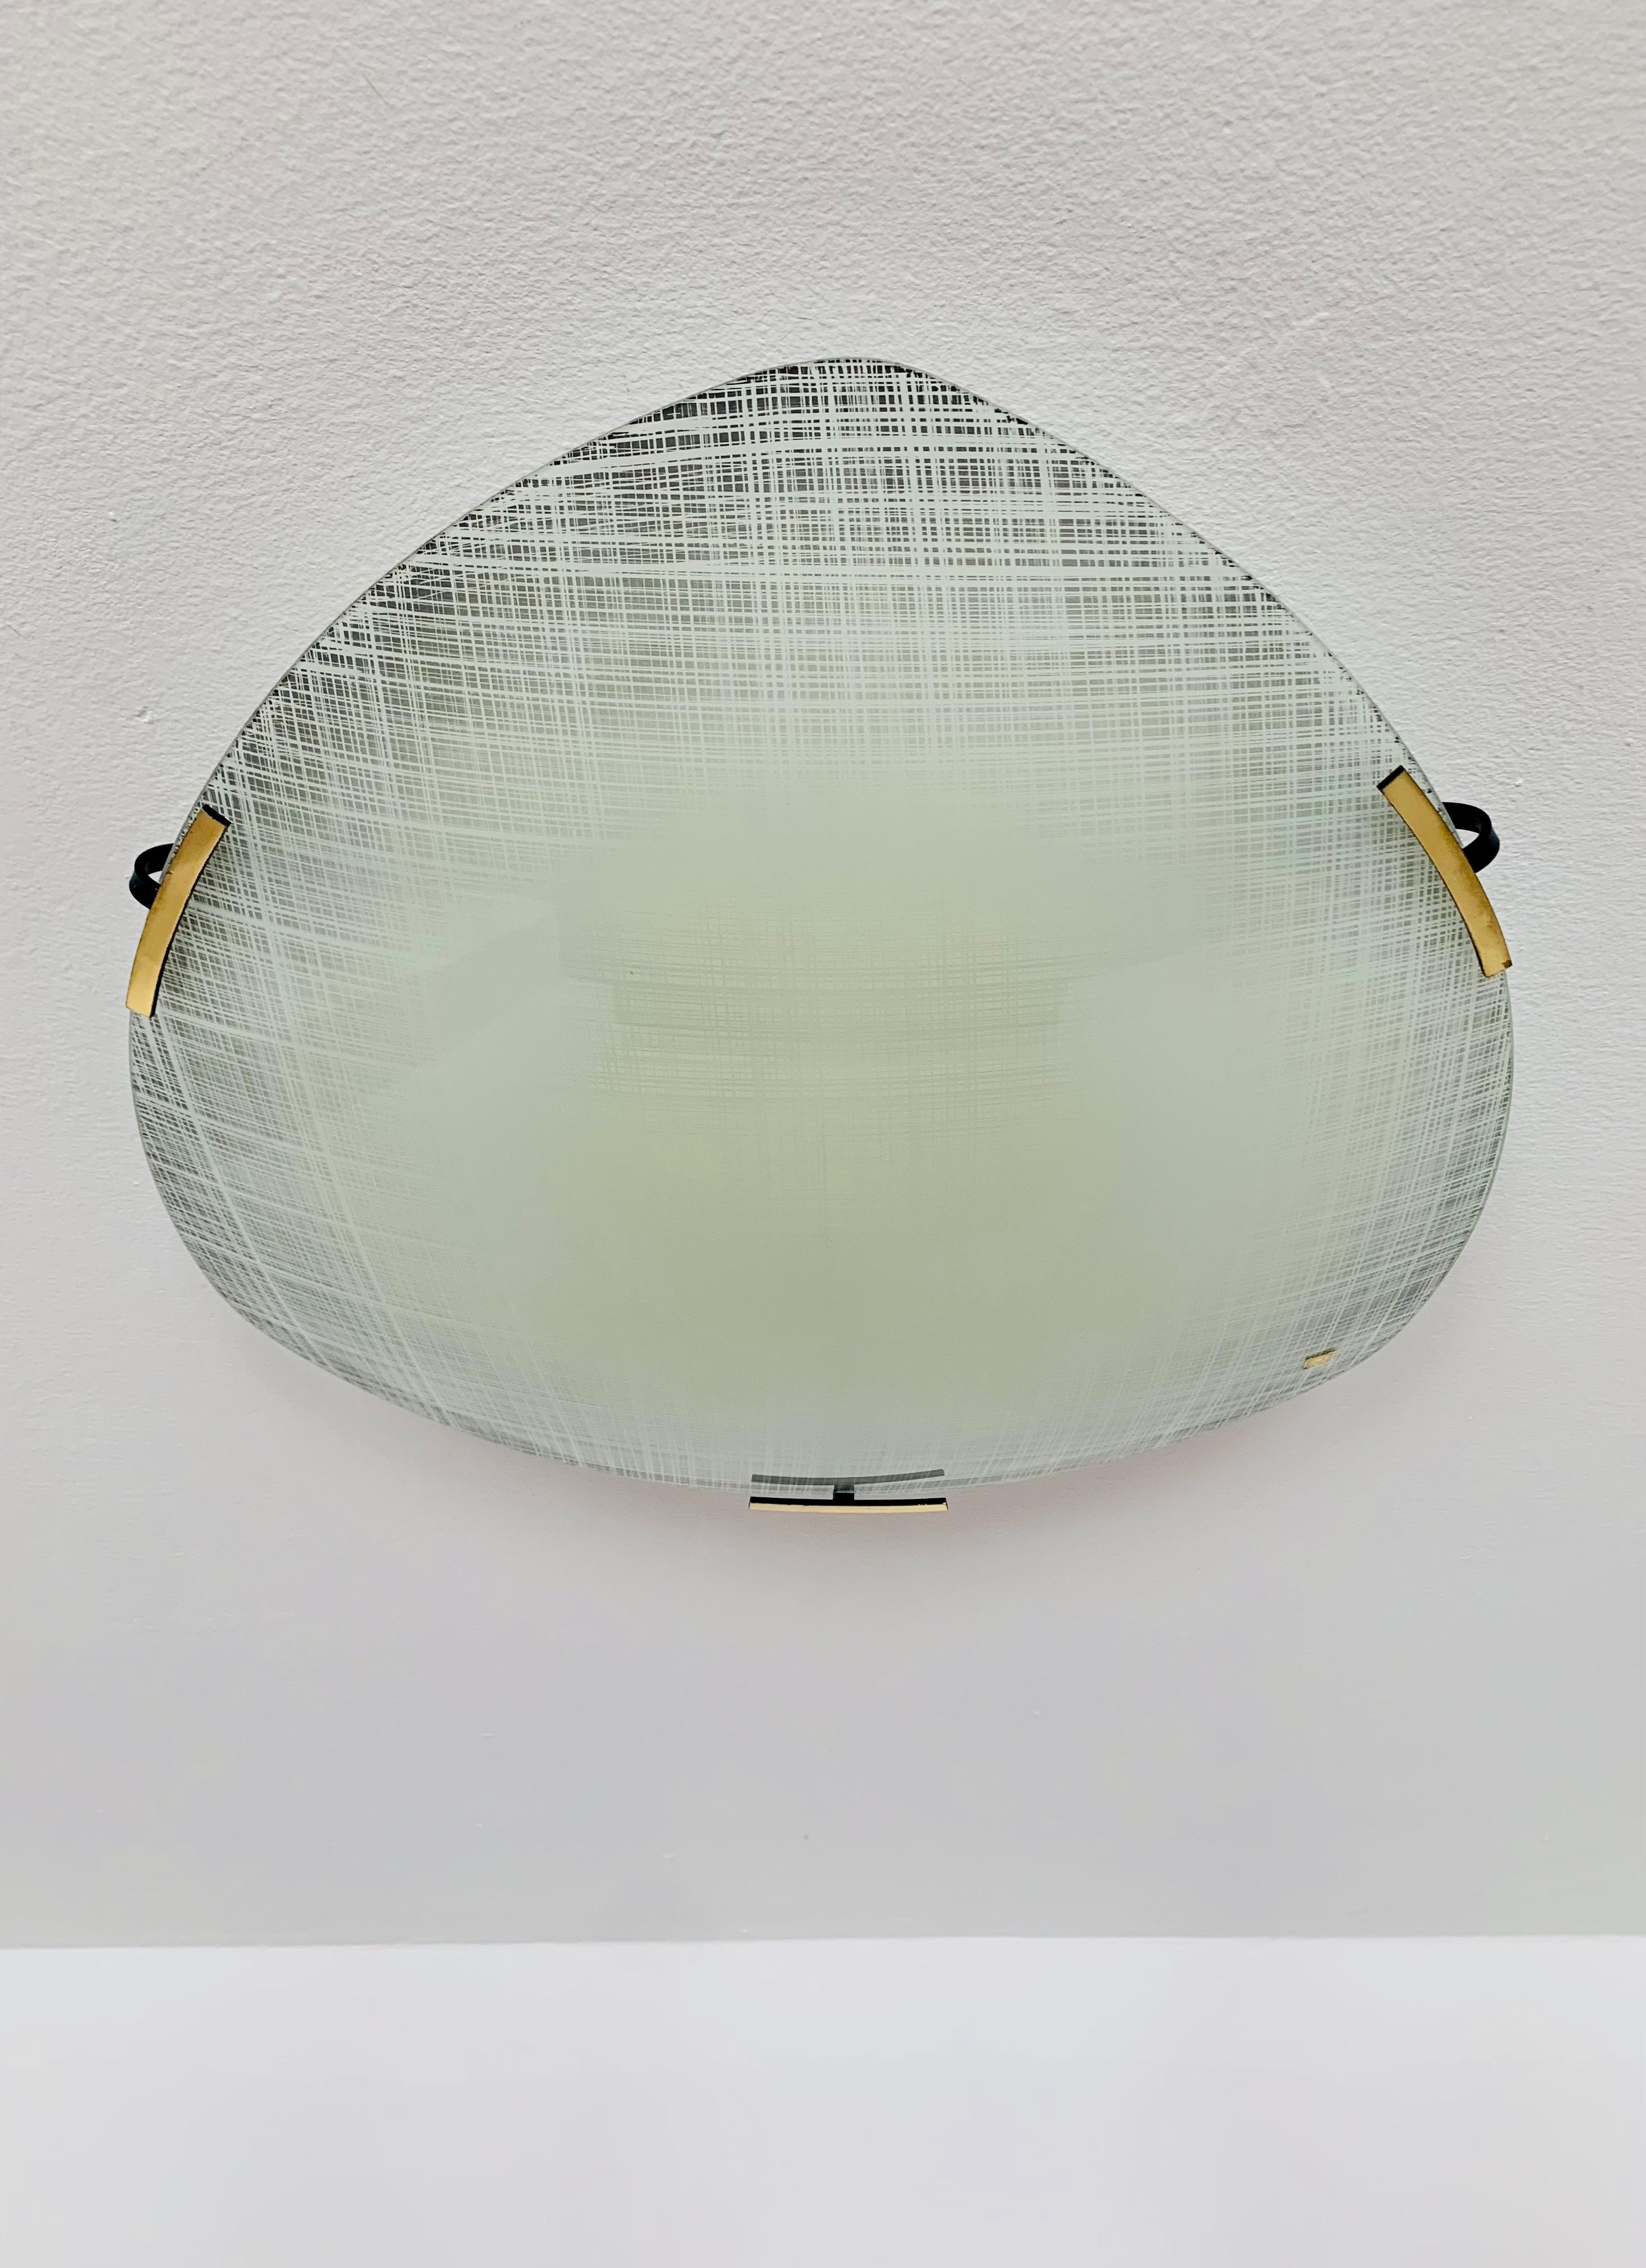 Exceptionally beautiful ceiling lamp from the 50s.
Very fine and beautiful design that fits wonderfully into any room.
A very elegant light is created.

Manufacturer: Doria

Condition:

Very good vintage condition with slight signs of age-related